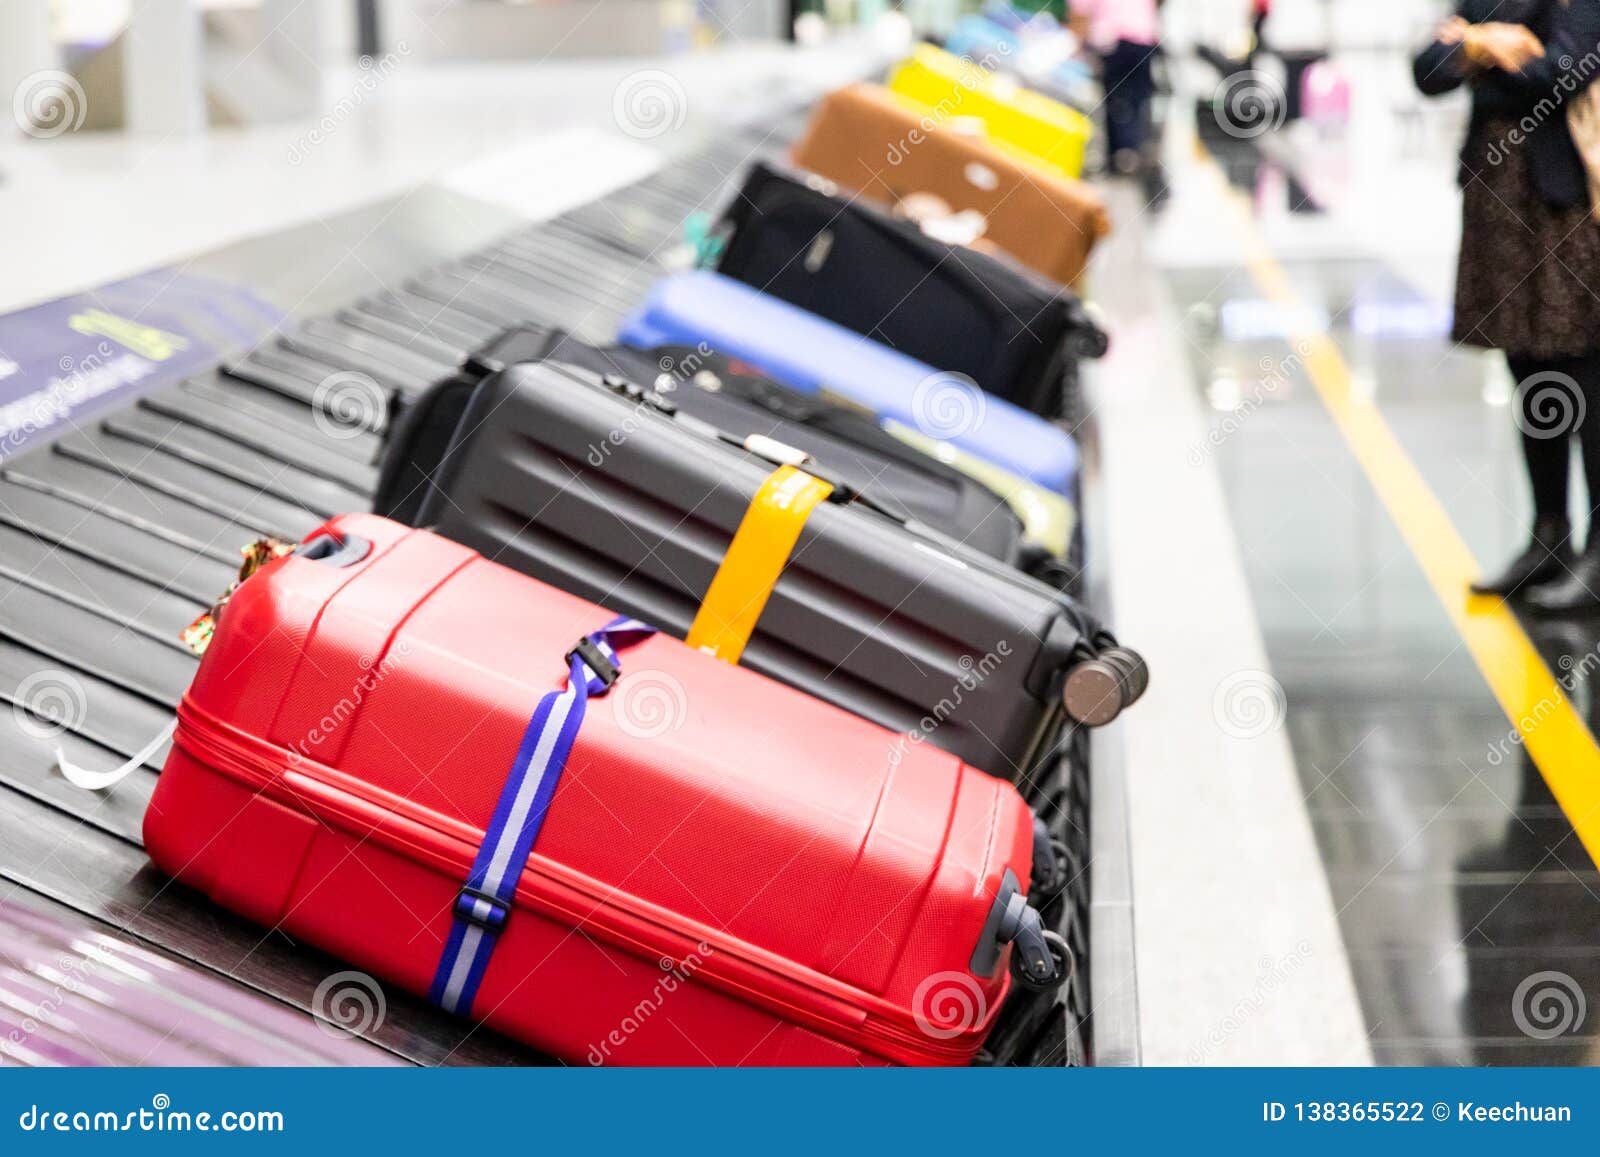 baggage luggage on conveyor carousel belt at airport arrival